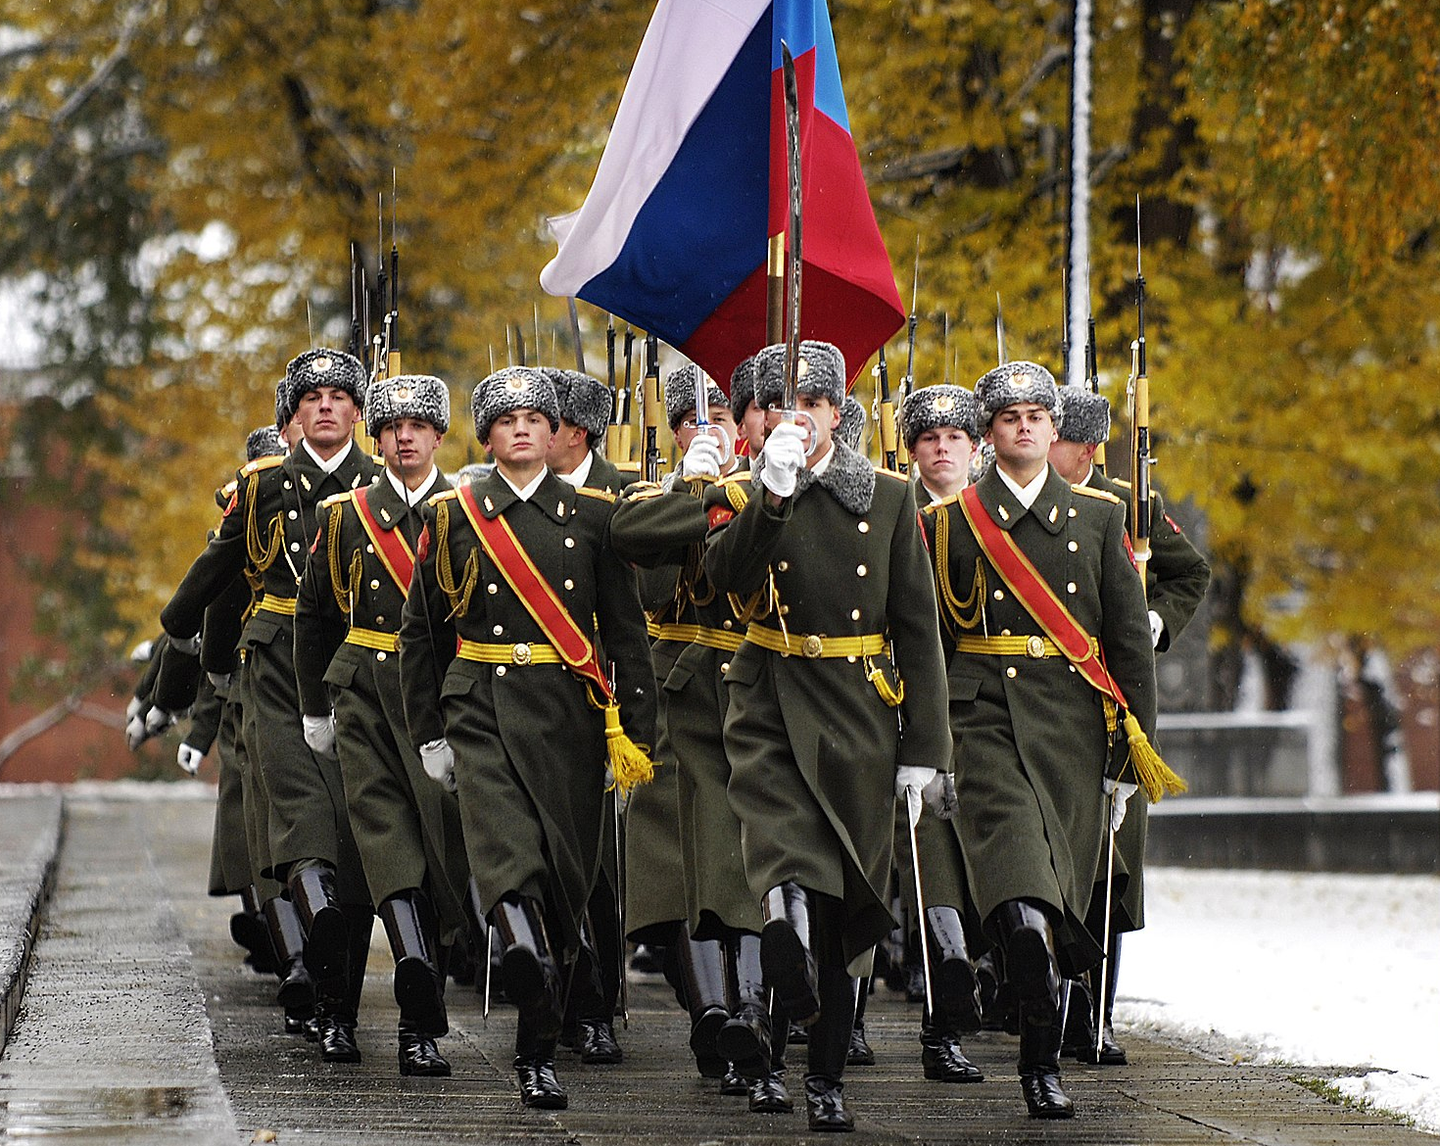 Russian honour guard from the 154th Preobrazhensky ICR perform a pass and review as part of a wreath-laying ceremony at the Tomb of the Unknown Soldier in Moscow, Russia. Wikimedia Commons